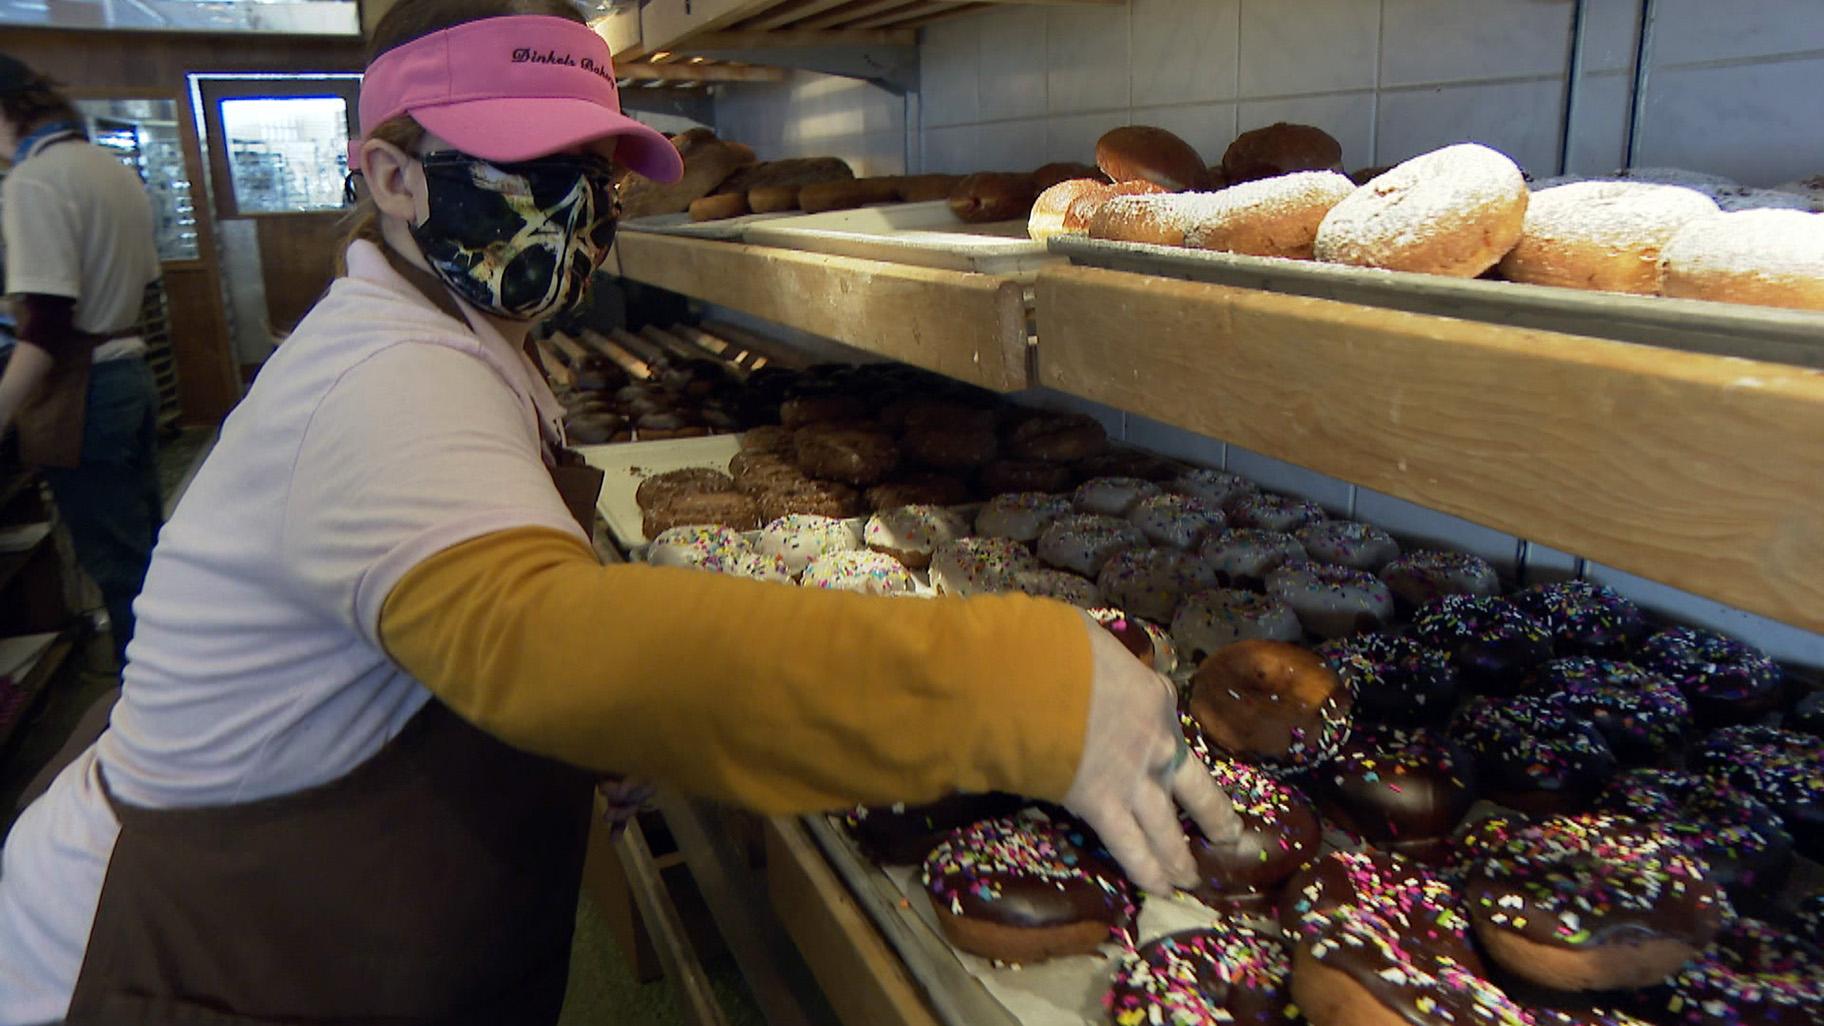 For more than 100 years Dinkel’s Bakery, has been serving all types of delicious pastries in the Lakeview neighborhood.  (WTTW News)